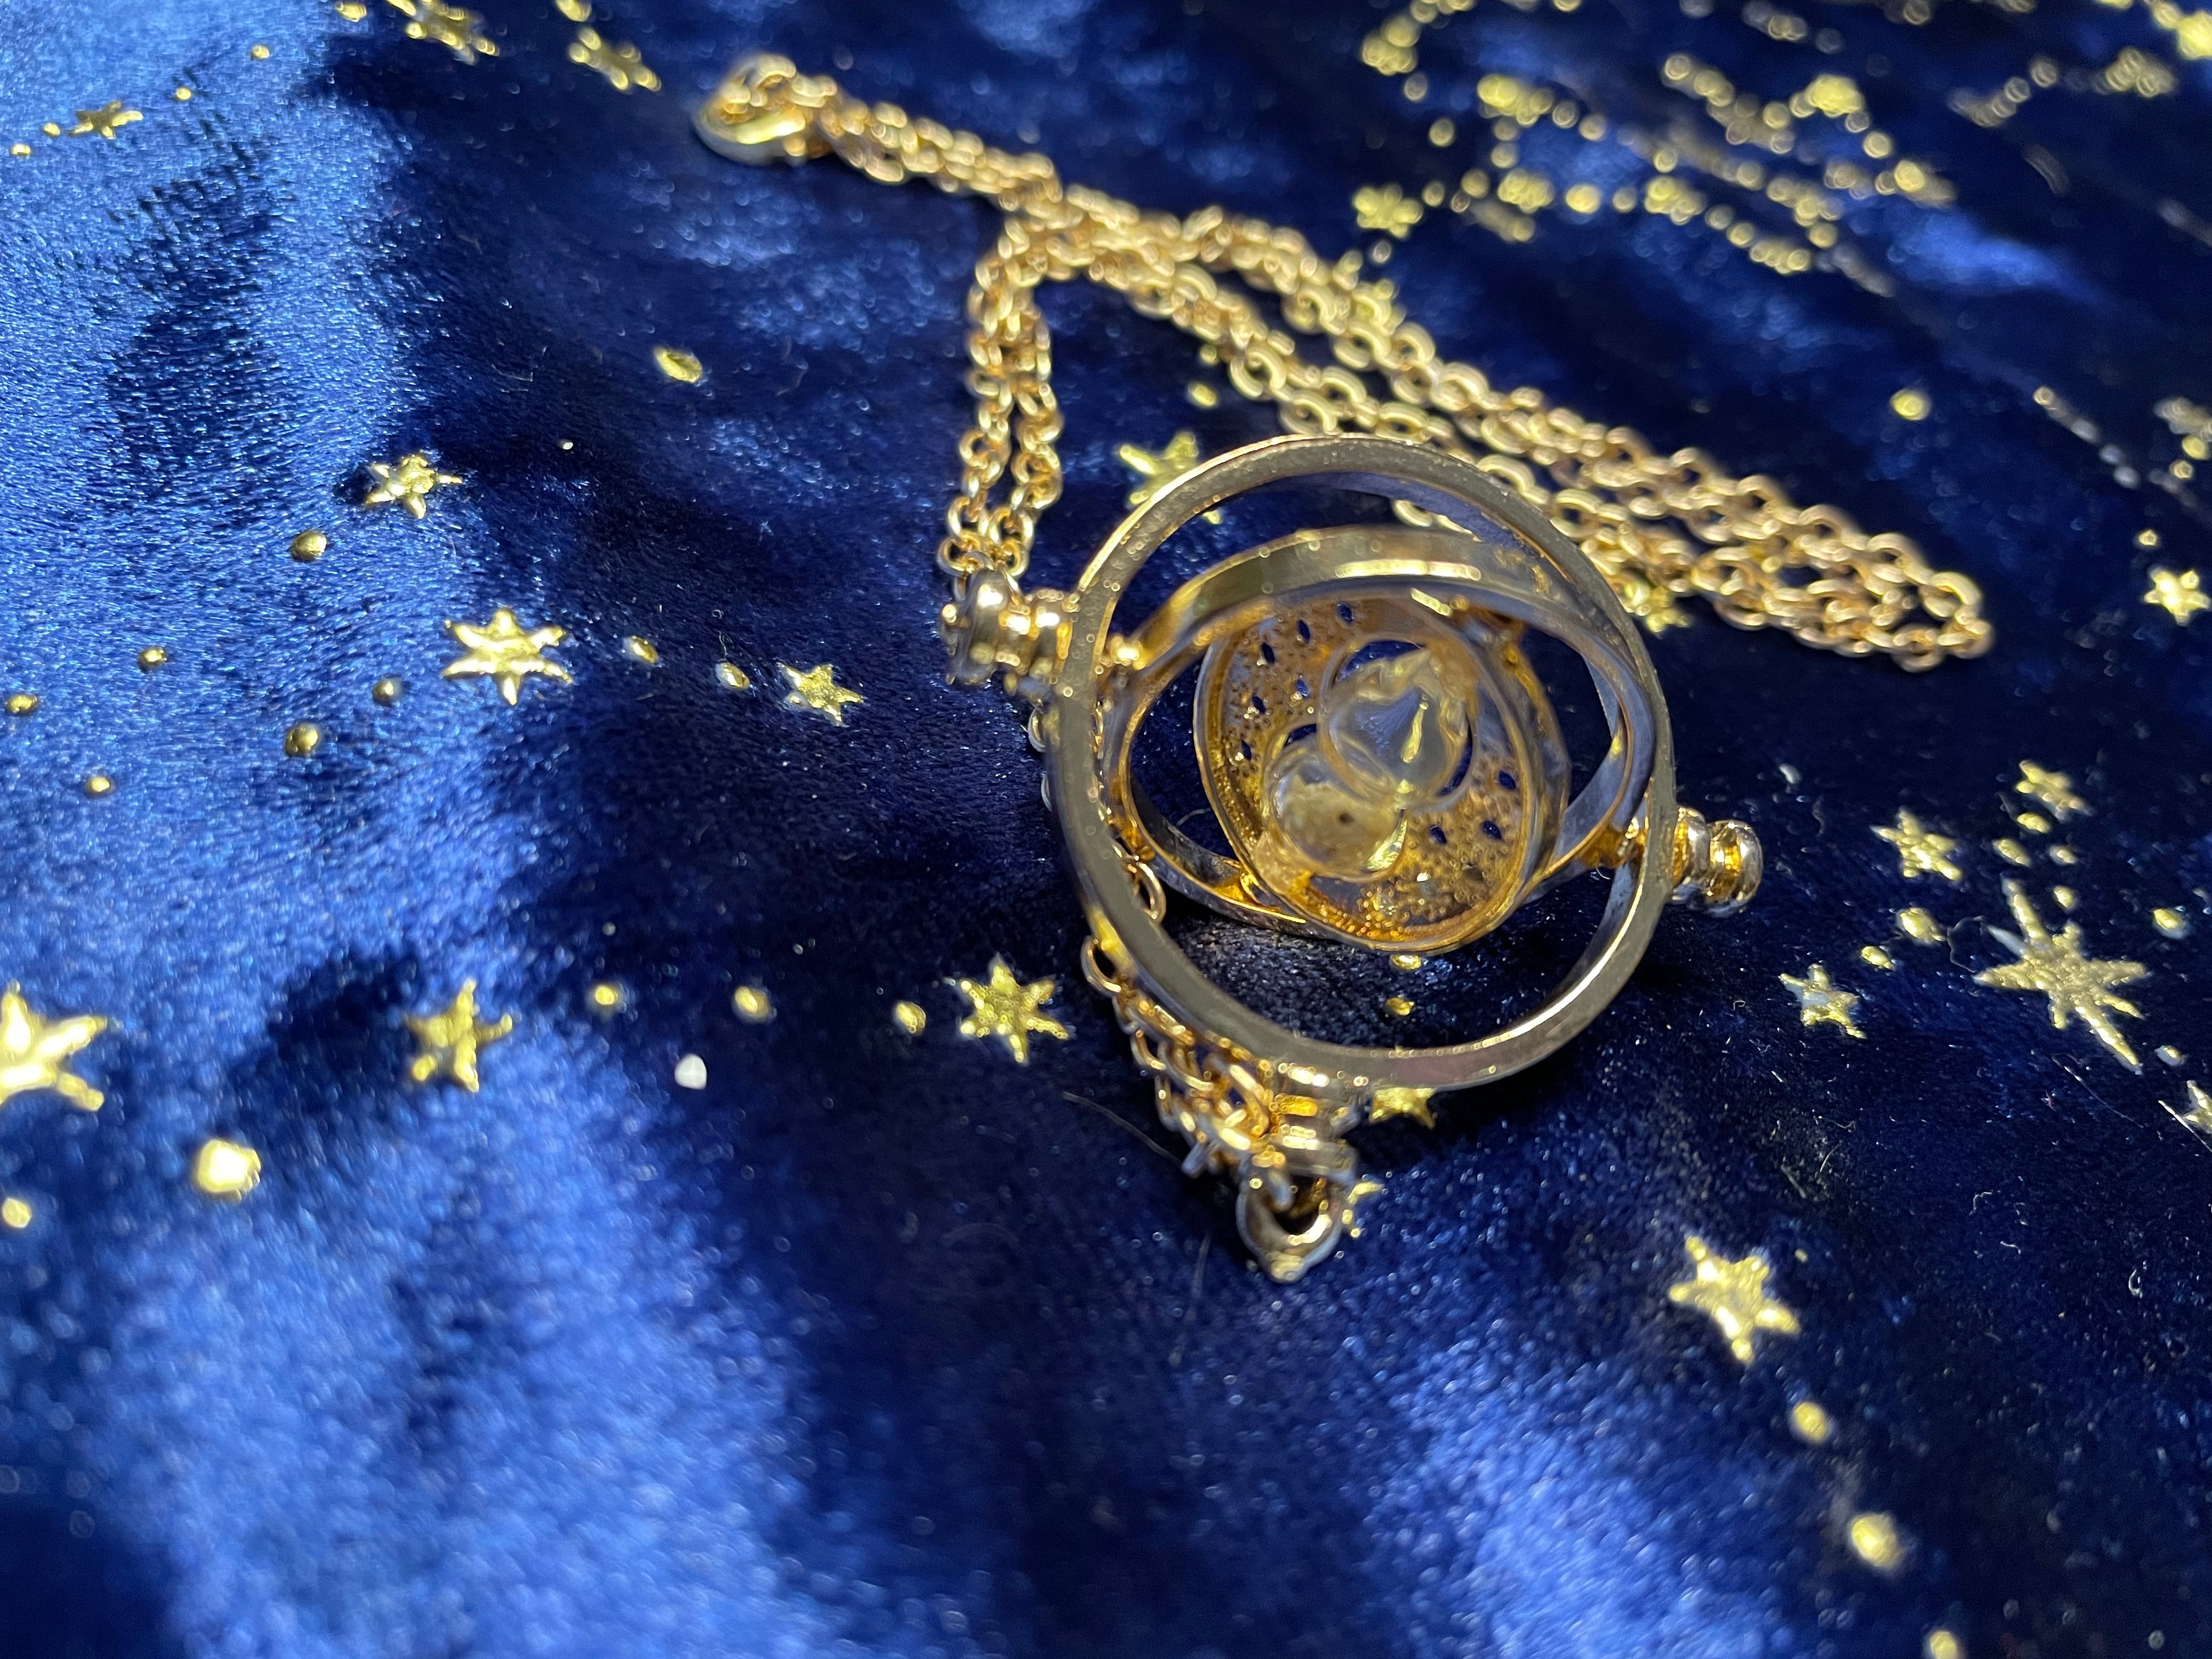 time turner /golden snitch necklace